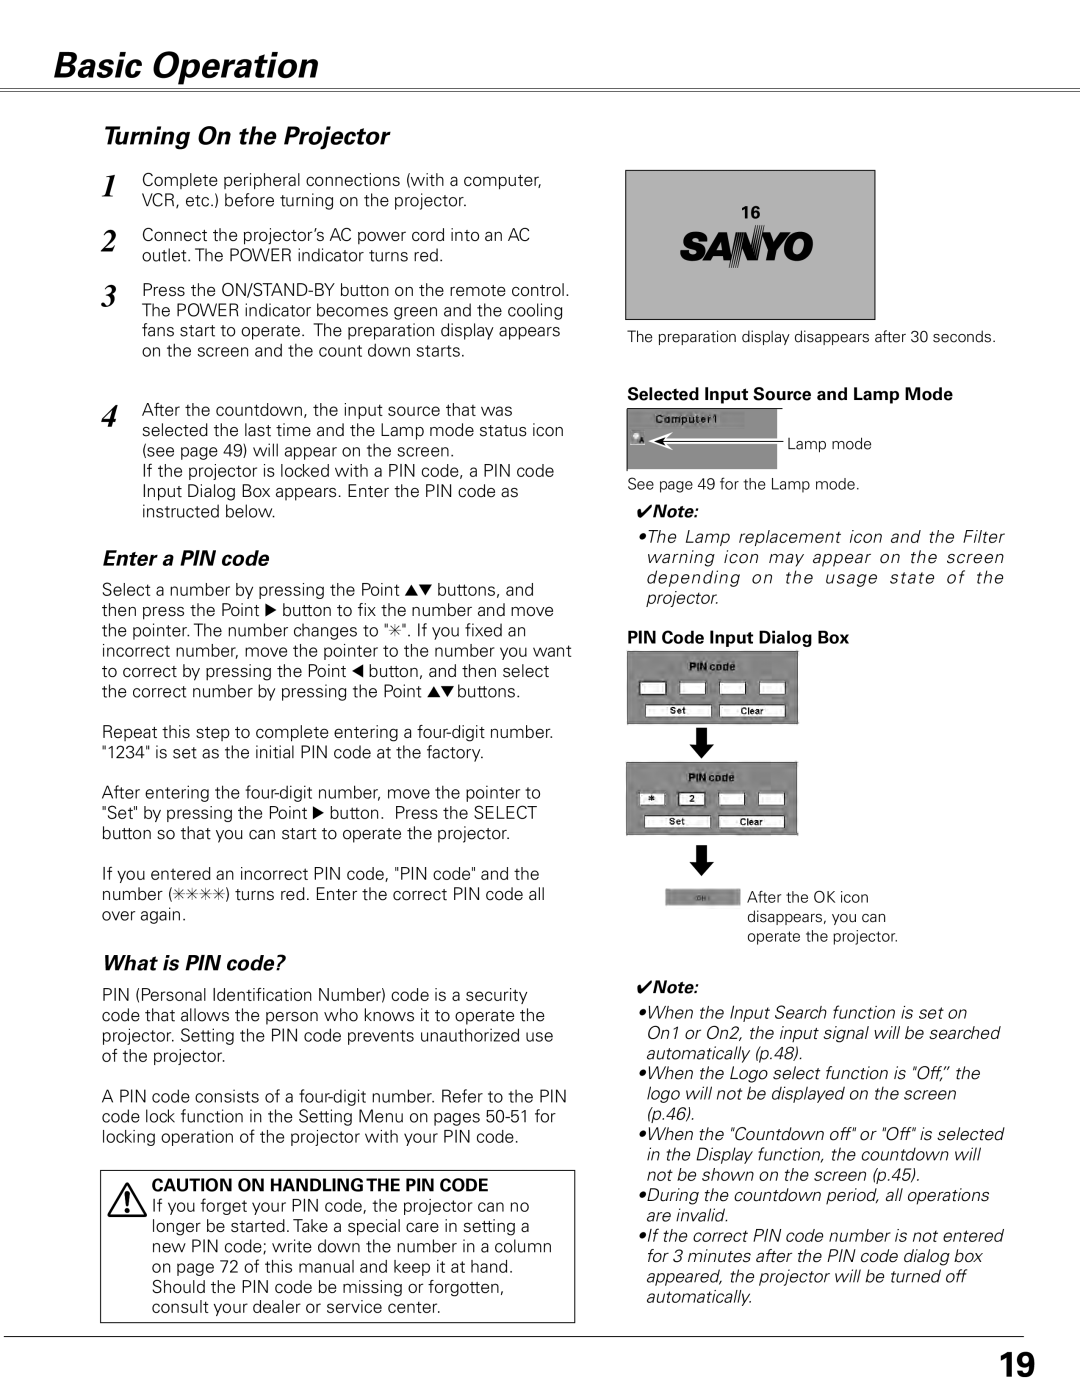 Sanyo PLC-XE50 Basic Operation, Turning On the Projector, Enter a PIN code, What is PIN code?, PIN Code Input Dialog Box 